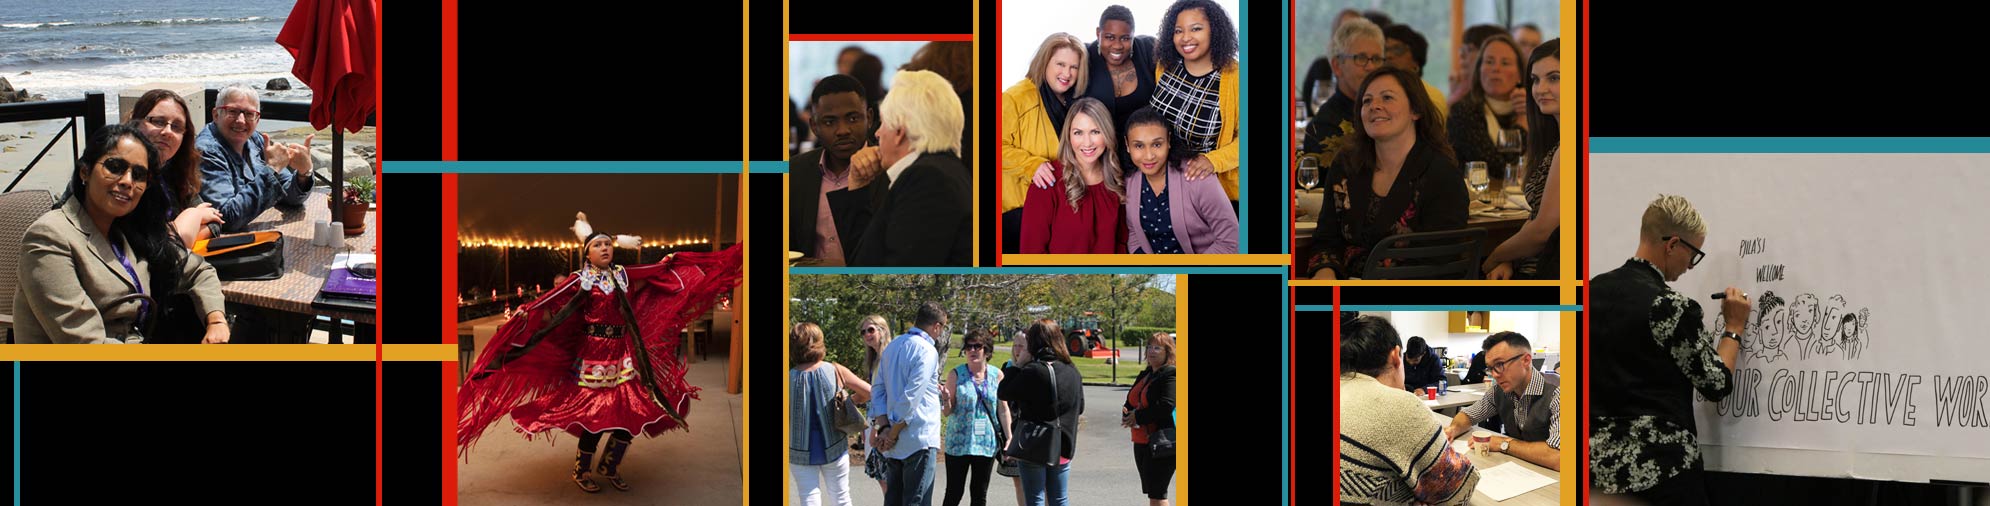 Collage of People Banner | NSCDA